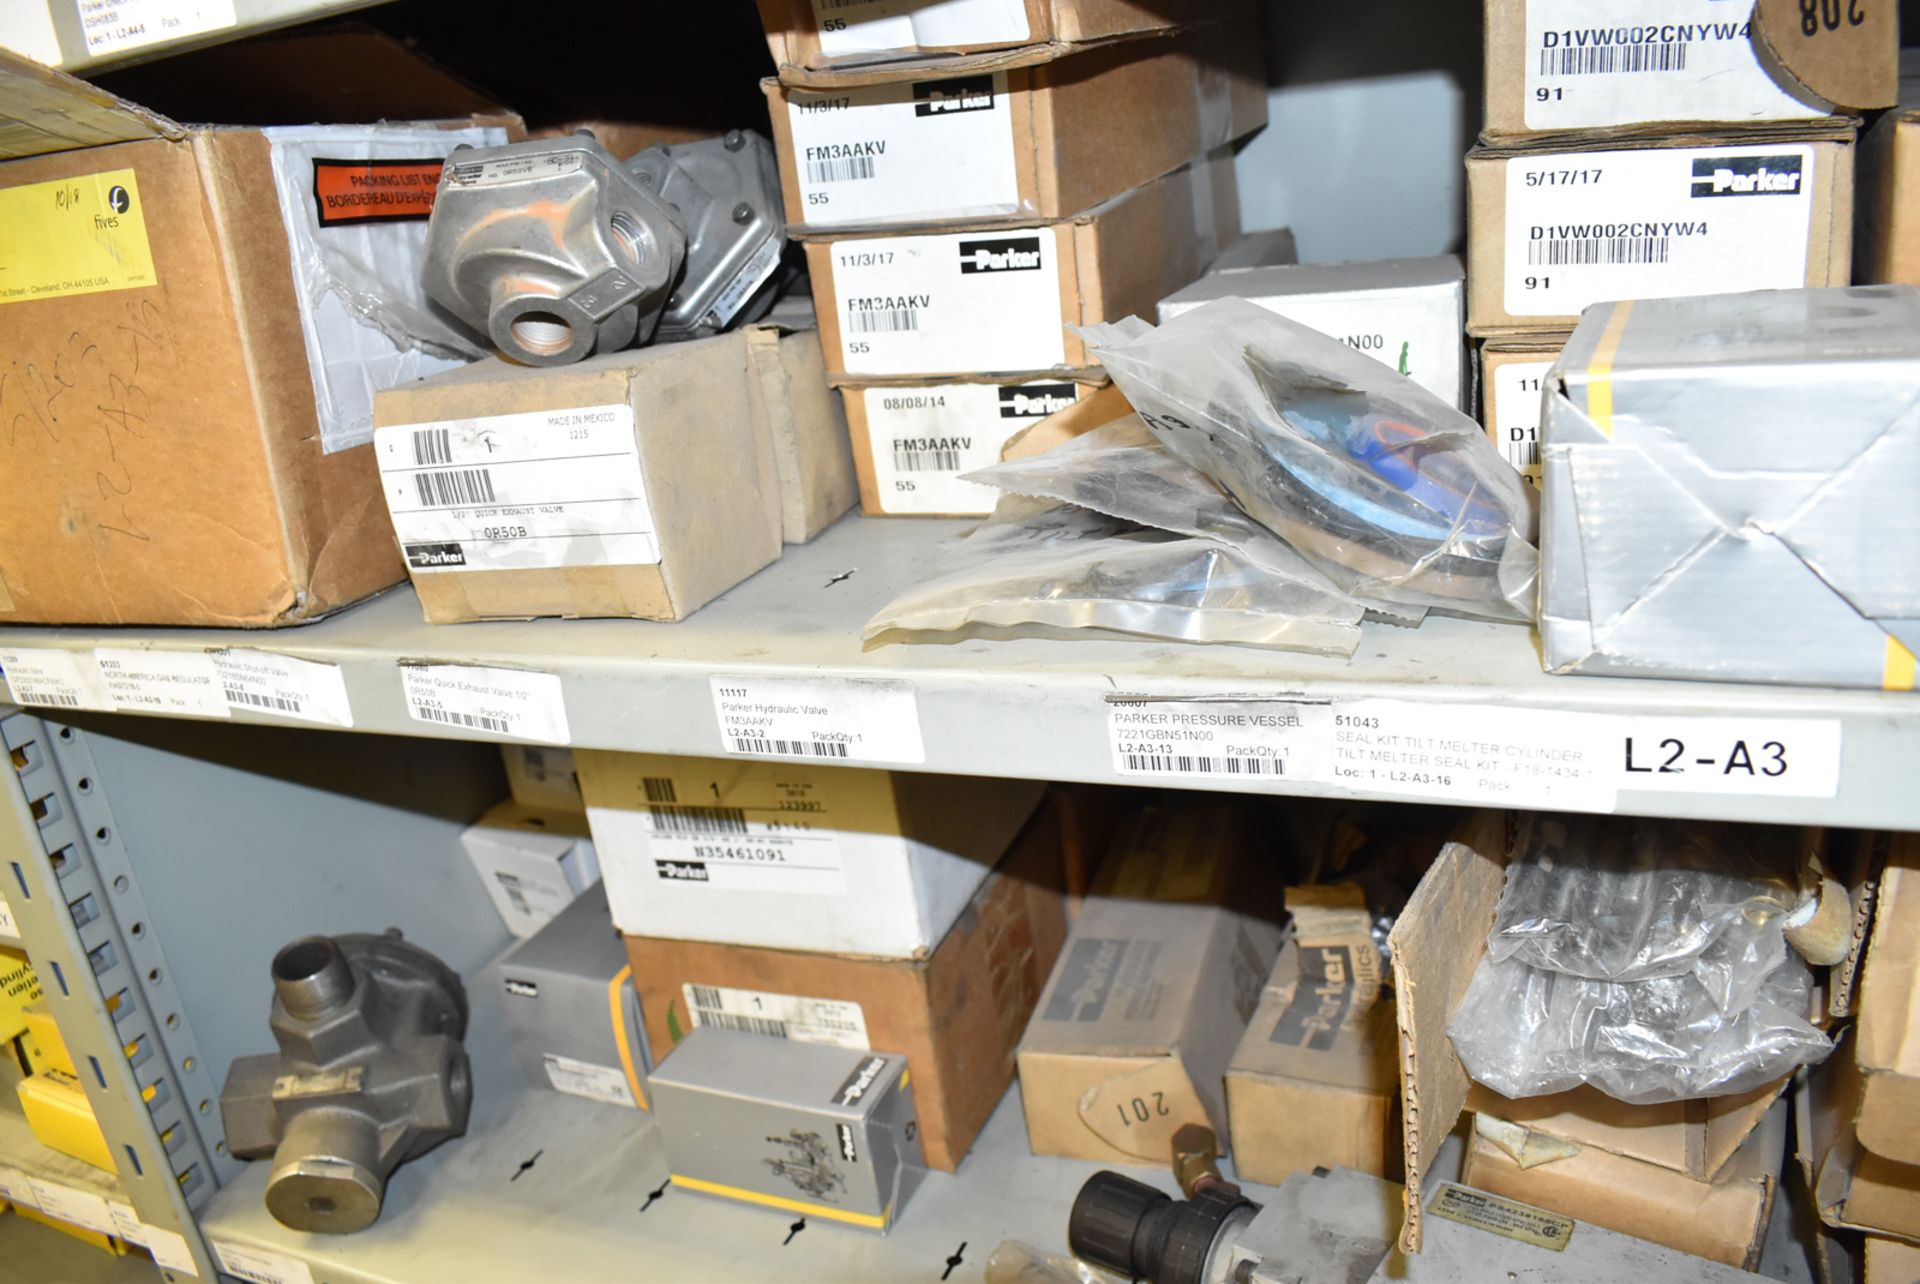 LOT/ CONTENTS OF SHELVES INCLUDING PARKER COMPONENTS, SPARE PARTS & MROs - Image 3 of 5